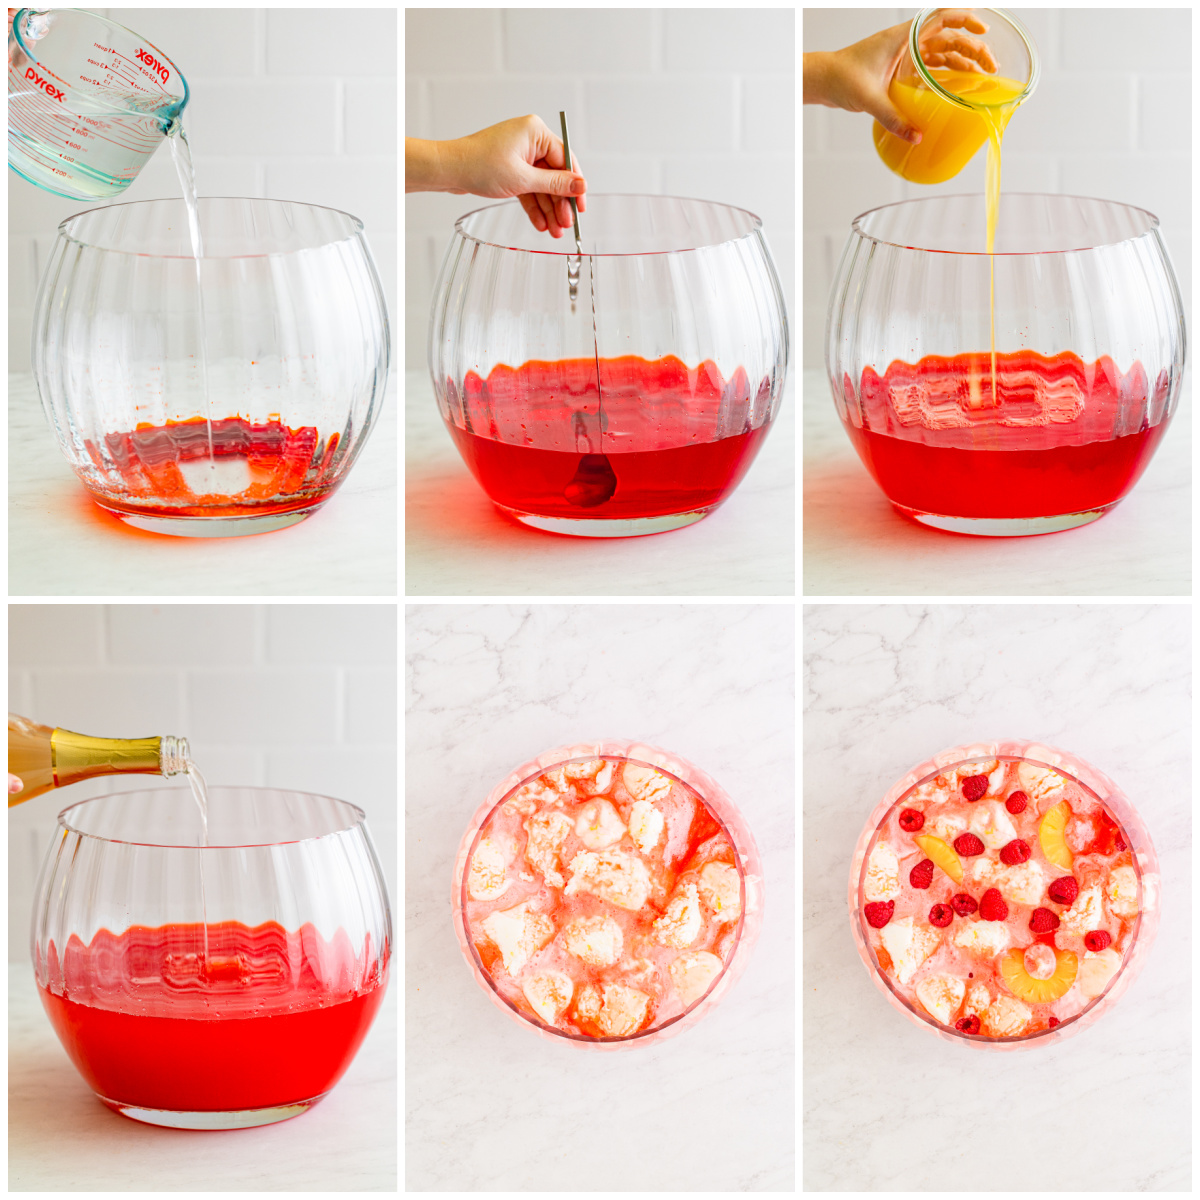 Step by step photos on how to make Valentine's Sherbet Punch.